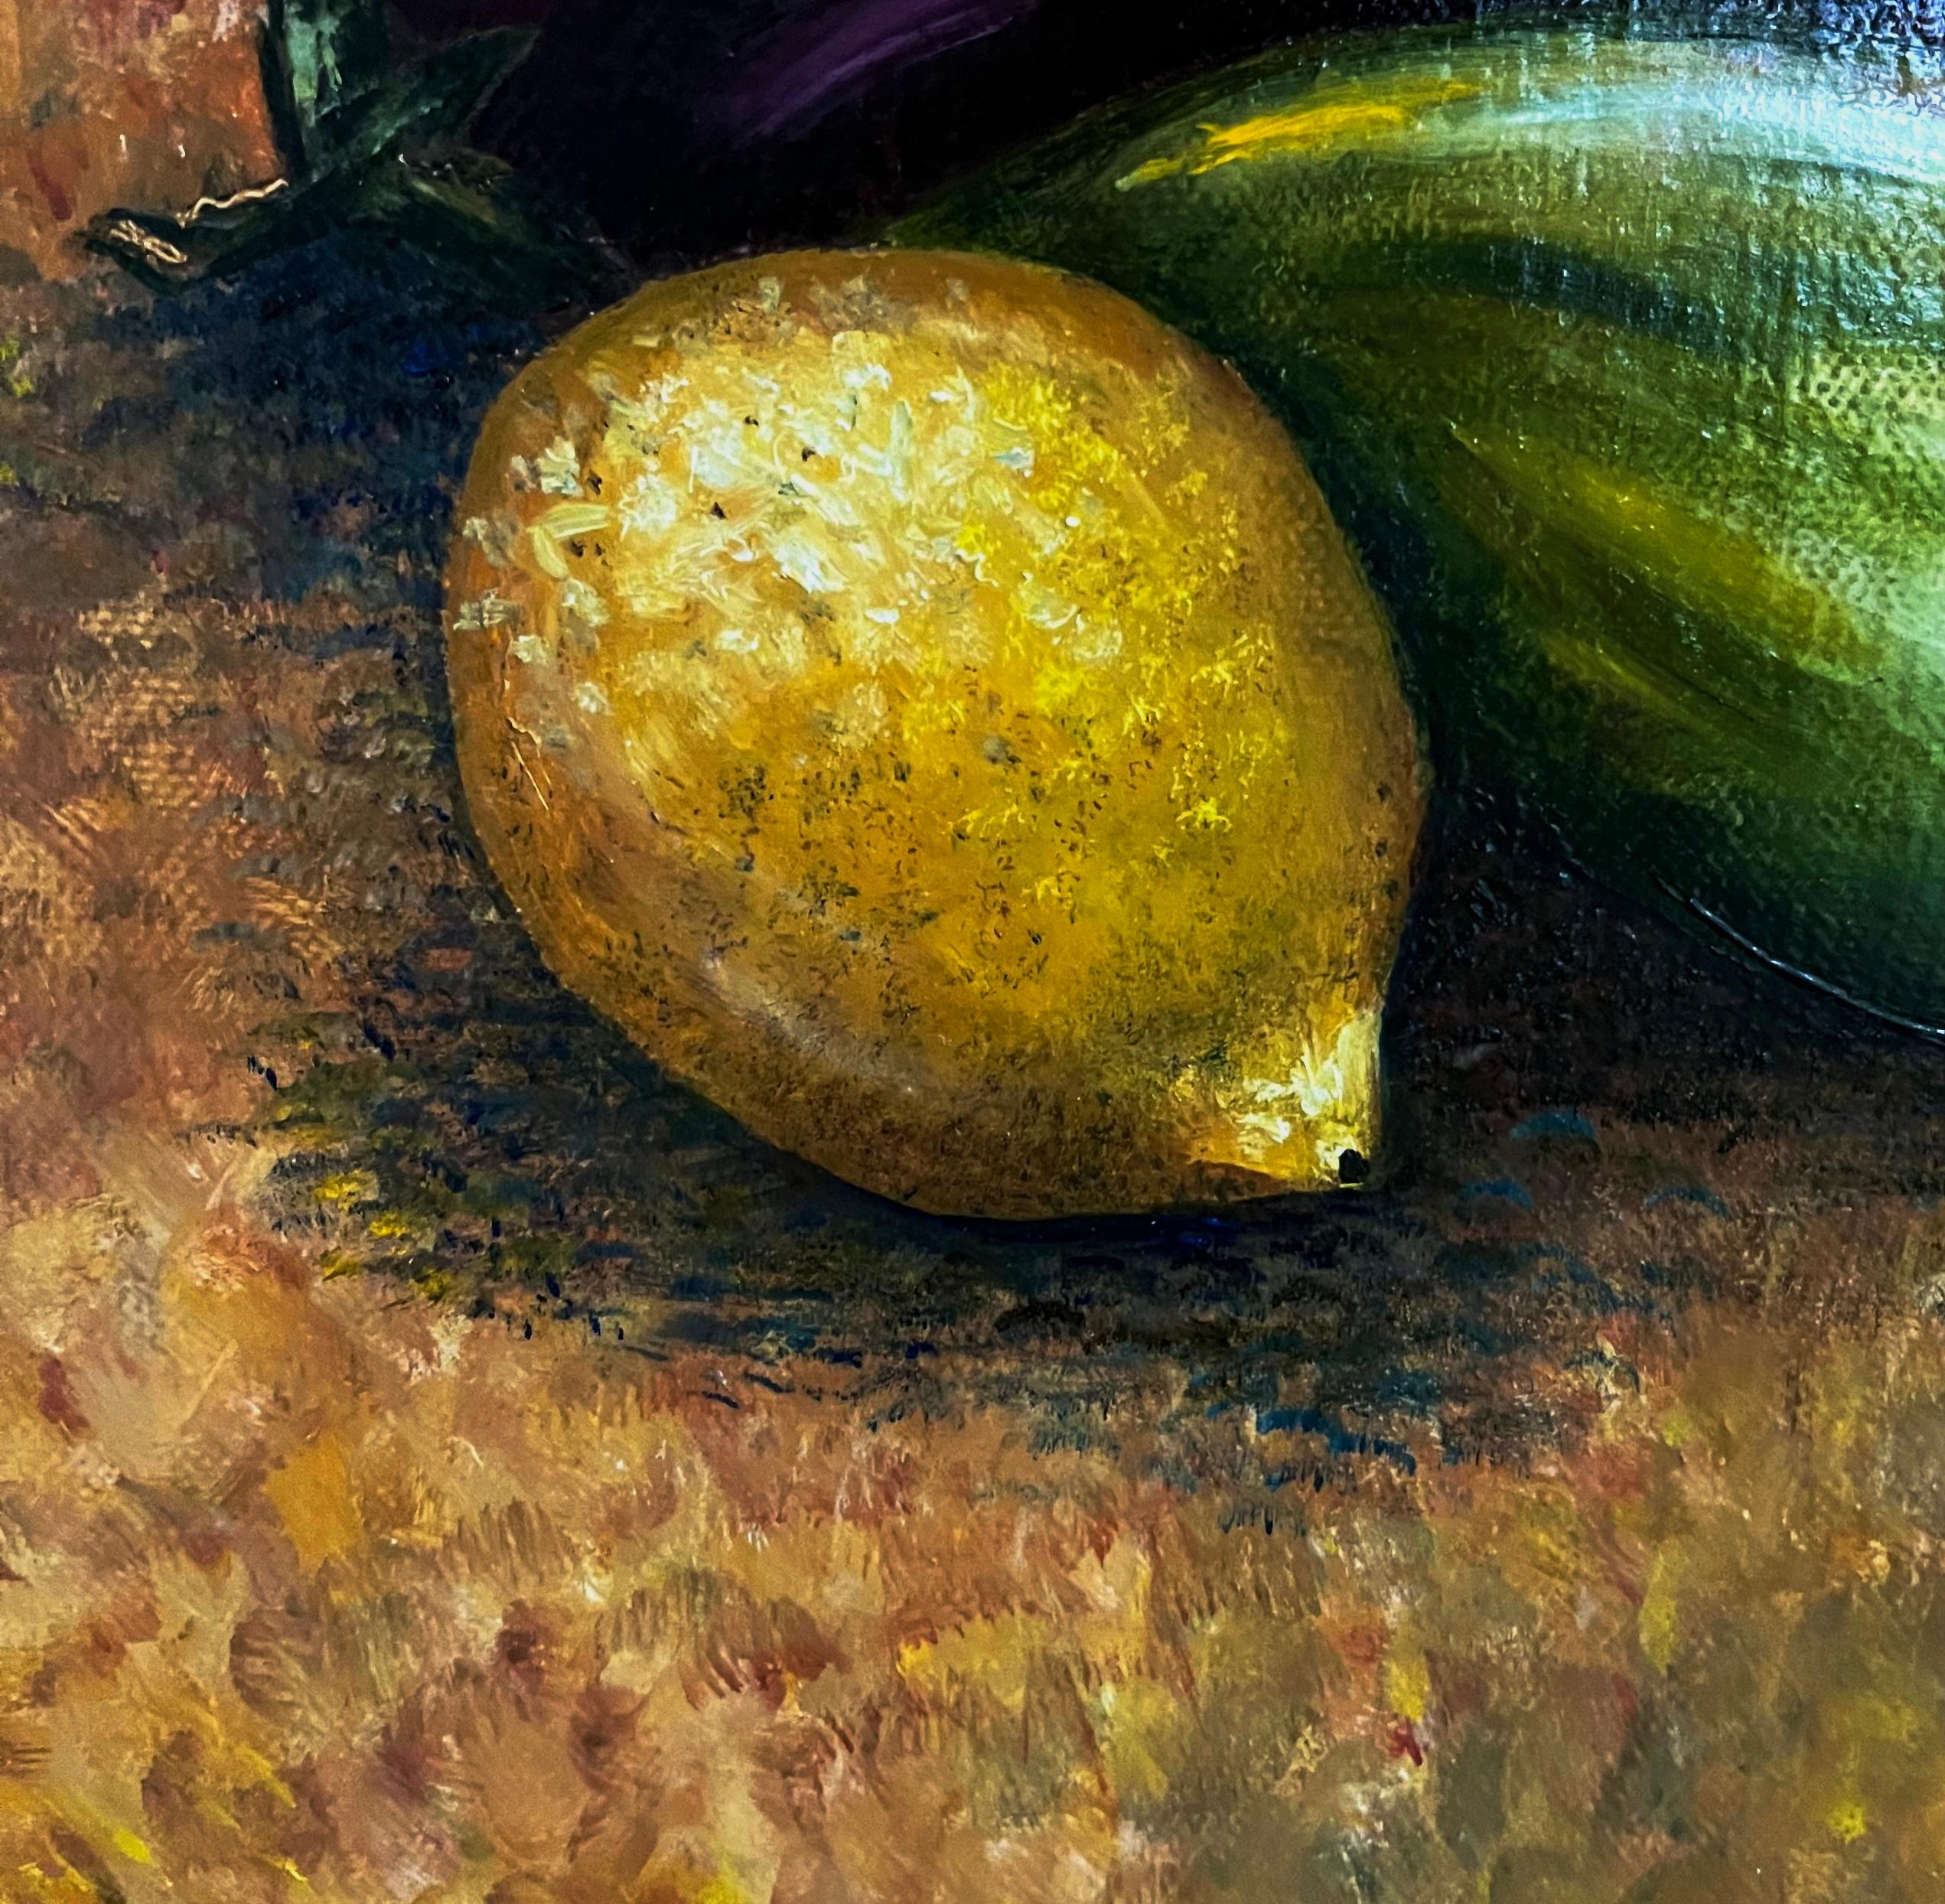  It may be healthy. Oil painting. Impressionism style. Still life 50/40 cm. 10